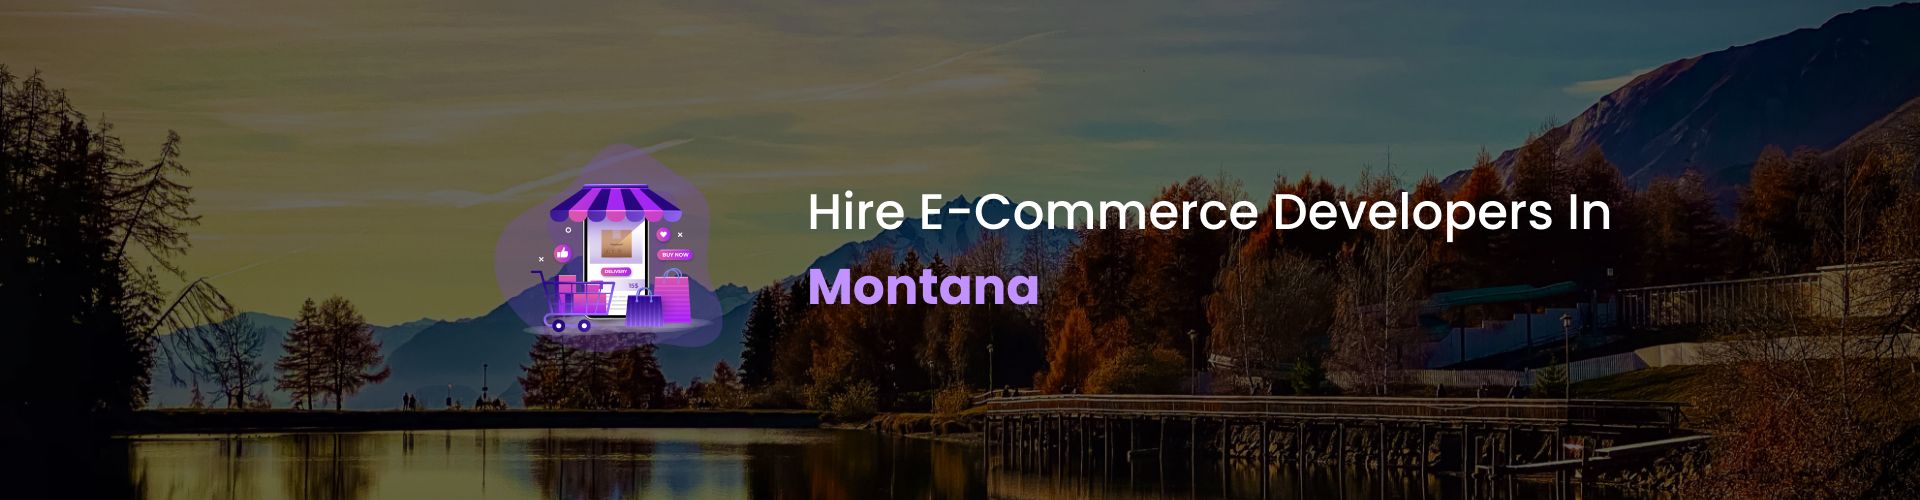 hire ecommerce developers in montana